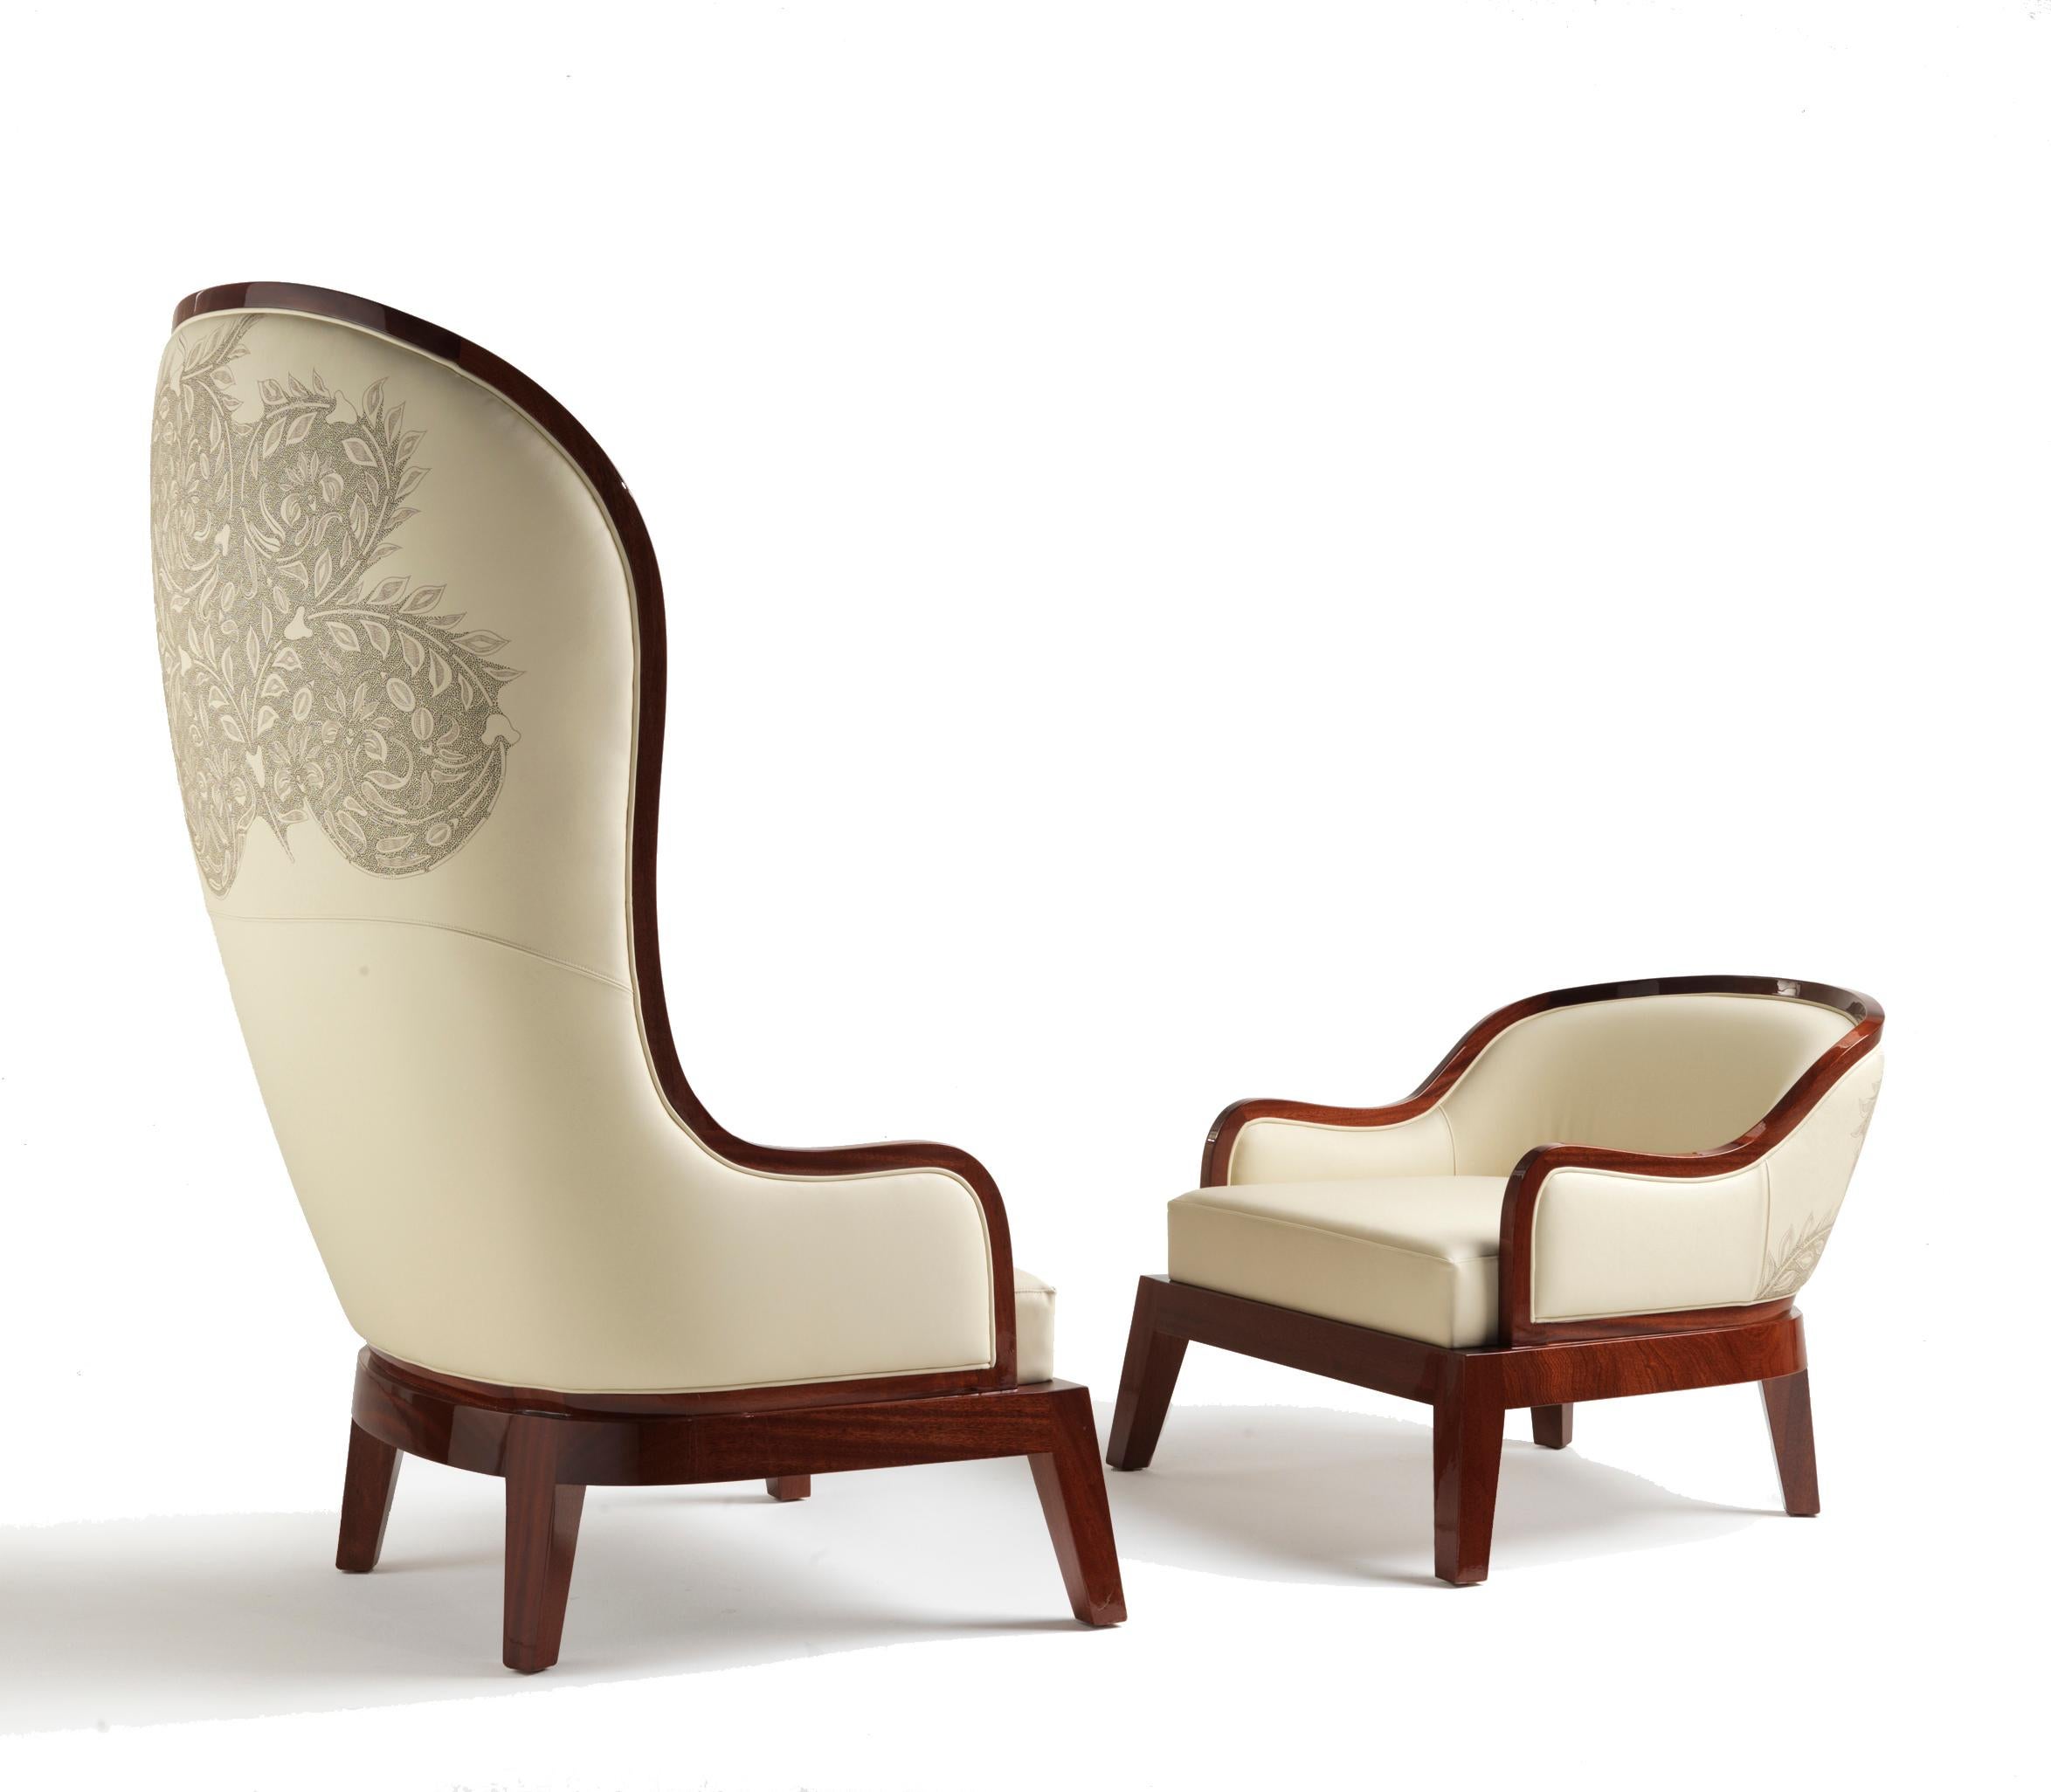 
Introducing the Madama low seat armchair—an exquisite fusion of compact design and timeless elegance. The armchair's defining feature is its flowing mahogany outline, creating a visual symphony that seamlessly blends form and function.

The sinuous